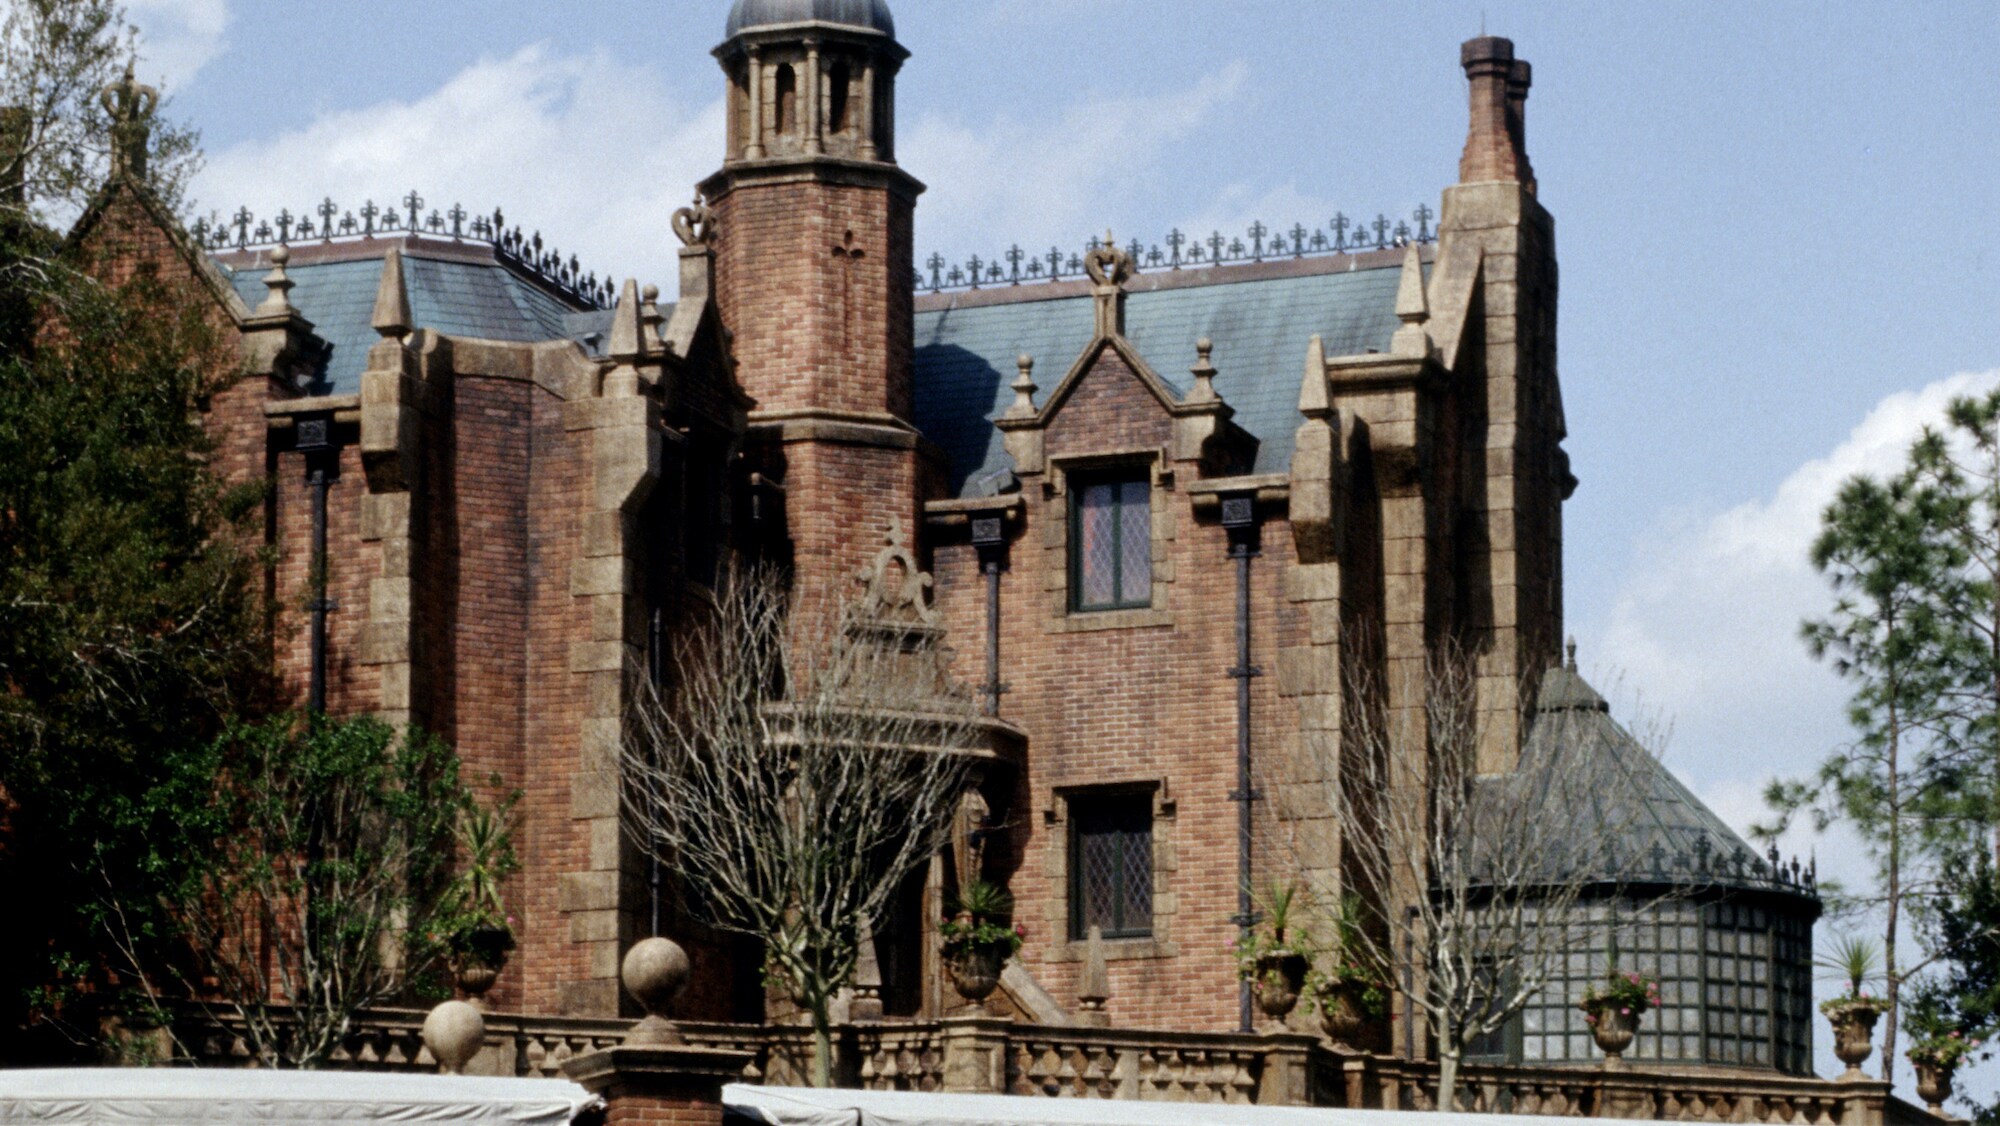 Image of the Haunted Mansion exterior during the day.